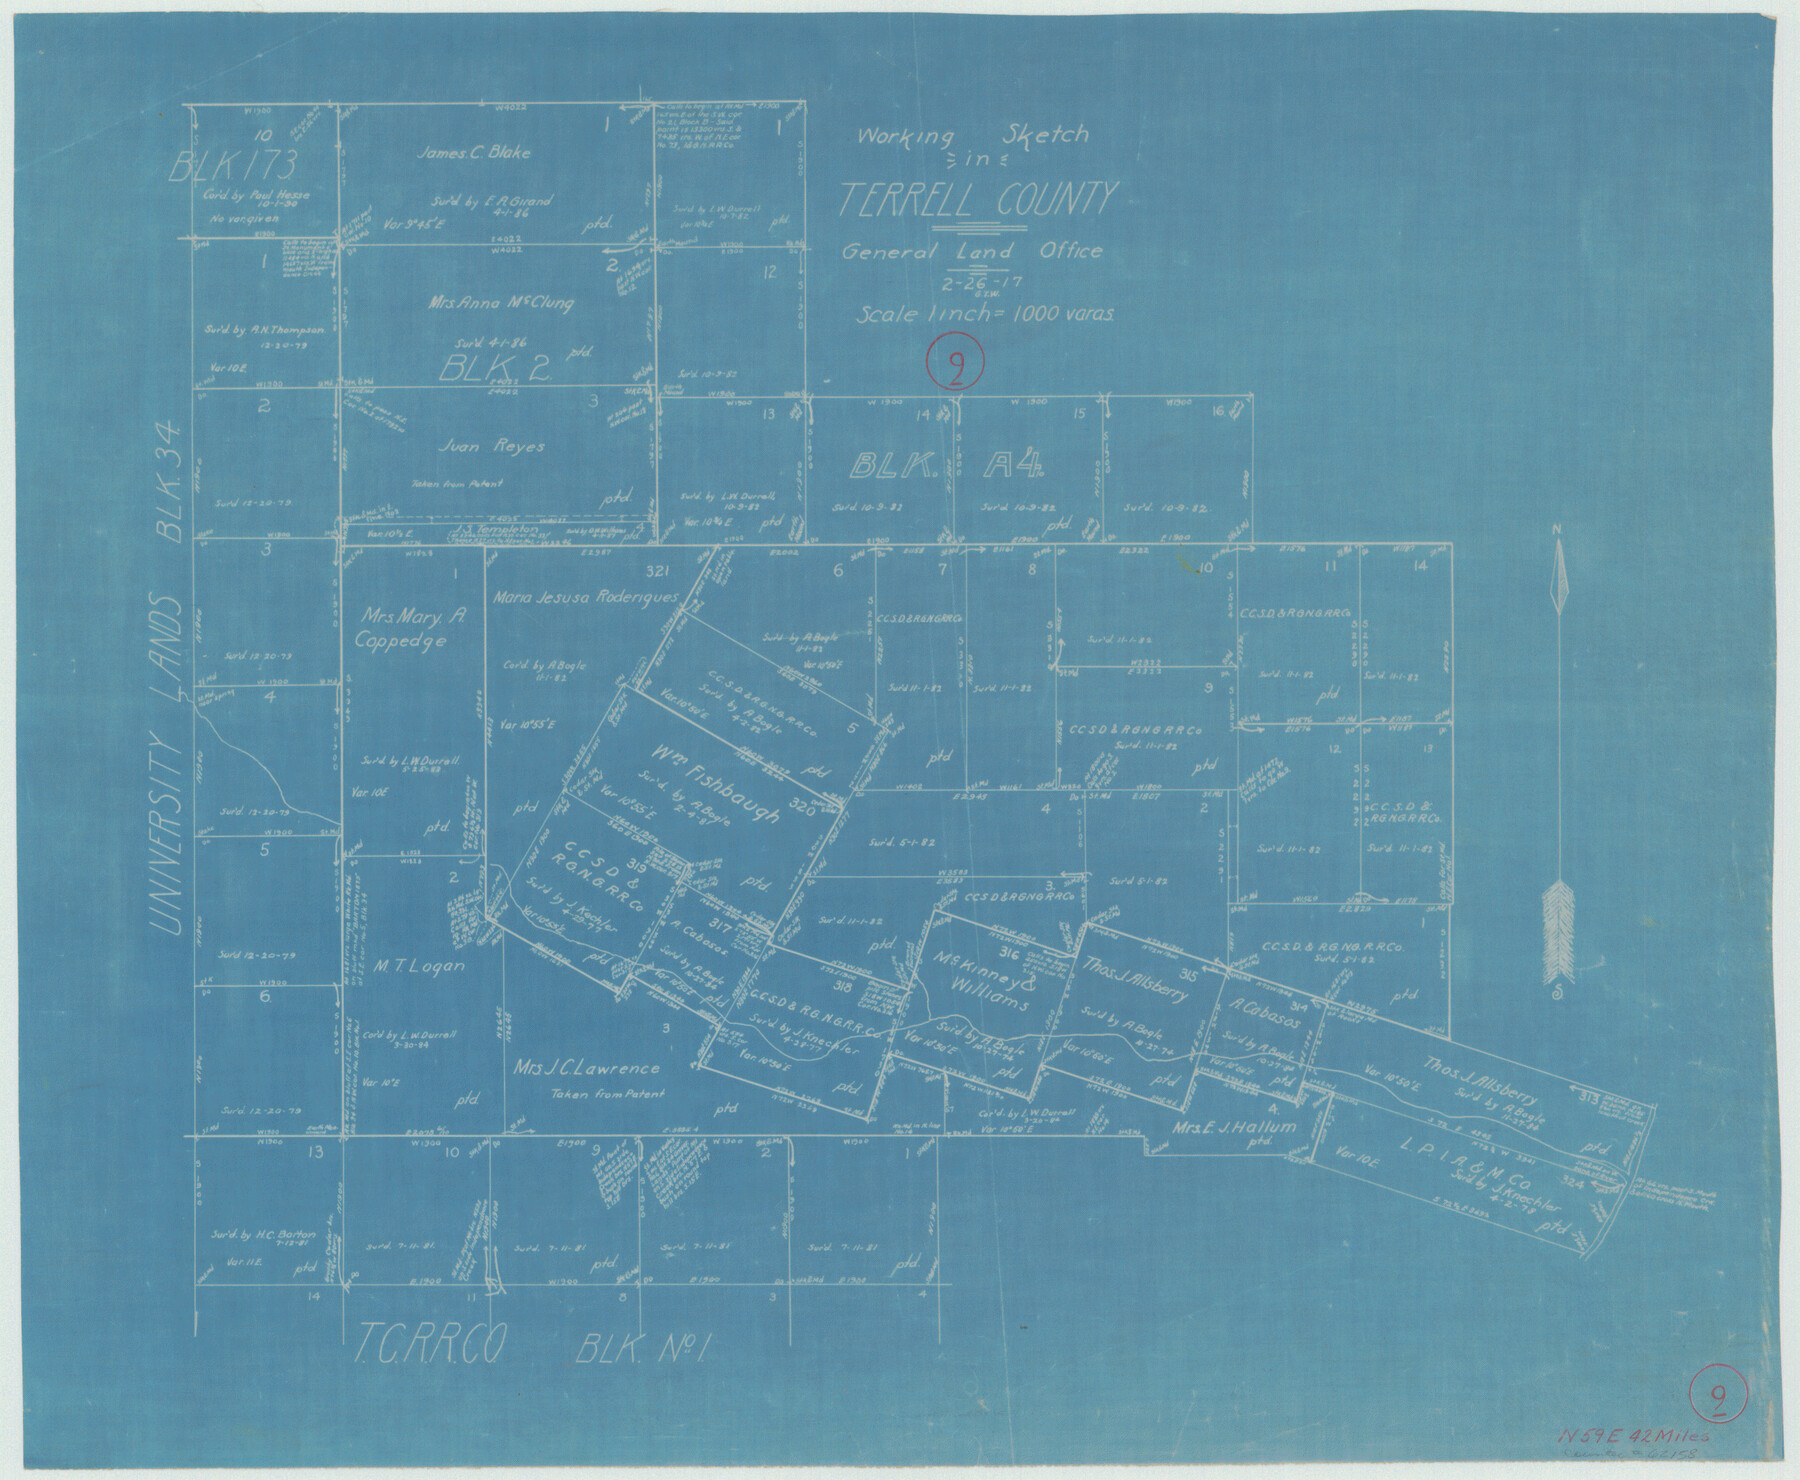 62158, Terrell County Working Sketch 9, General Map Collection